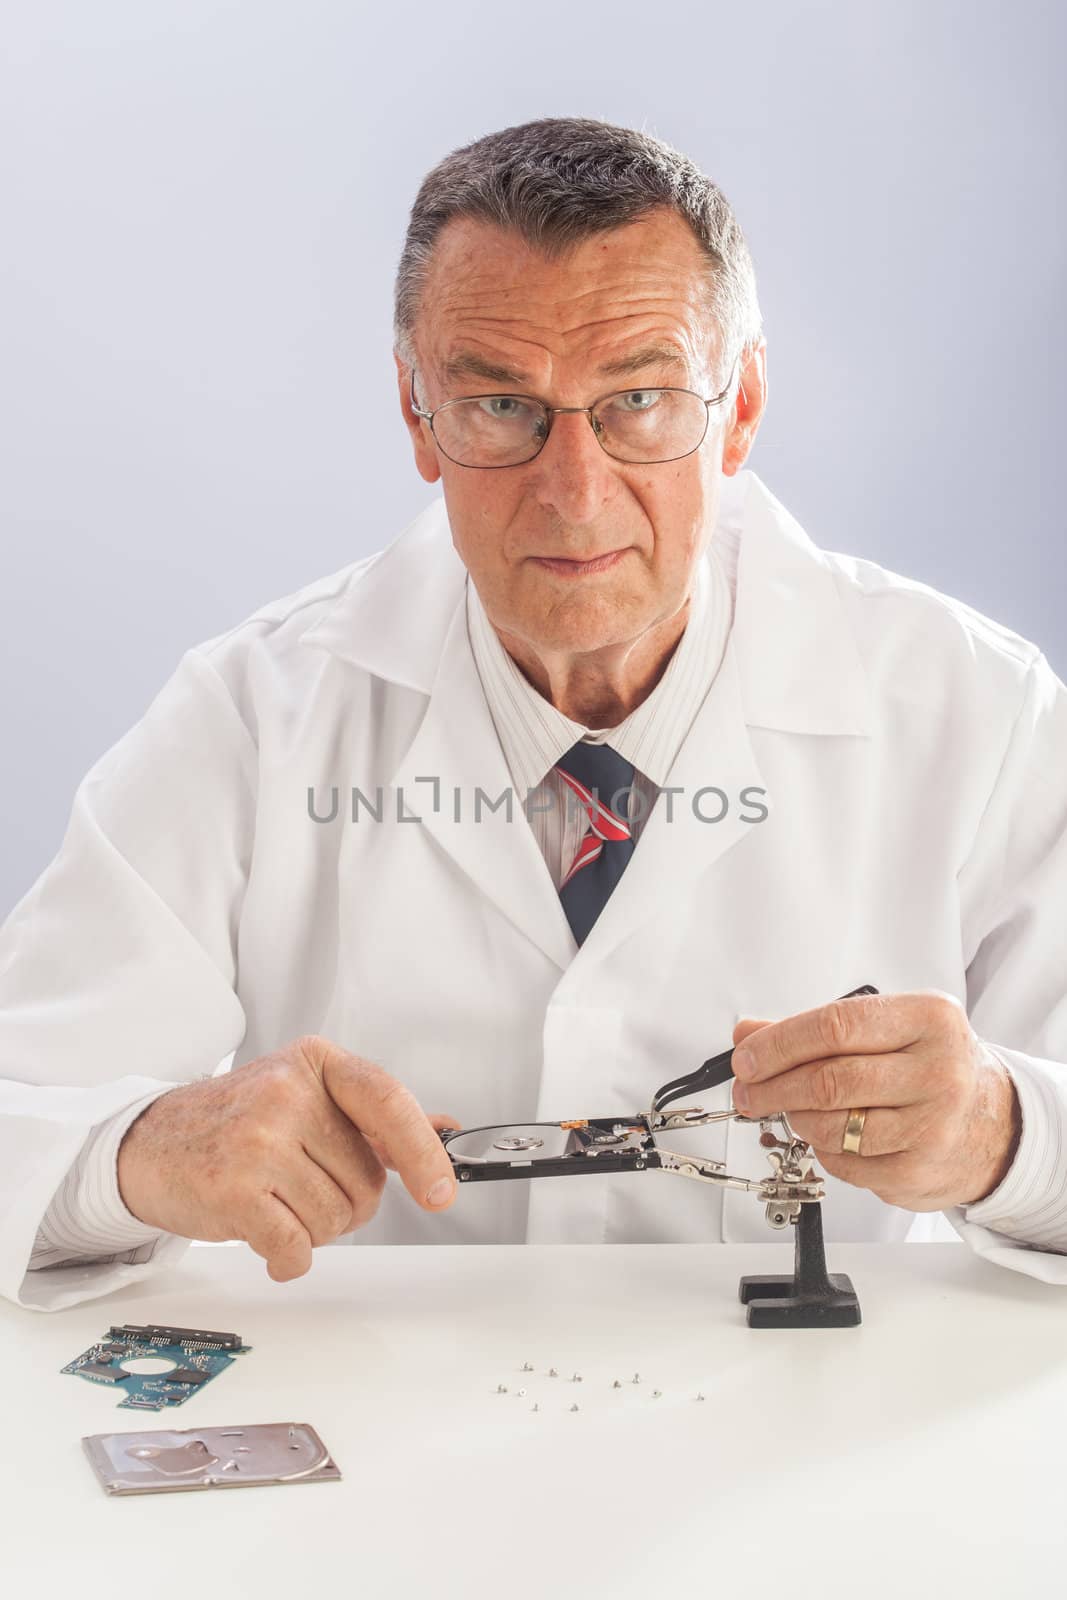 An older male wearing a white lab coat and repairing electronic equipments, like a technician or a repair man.